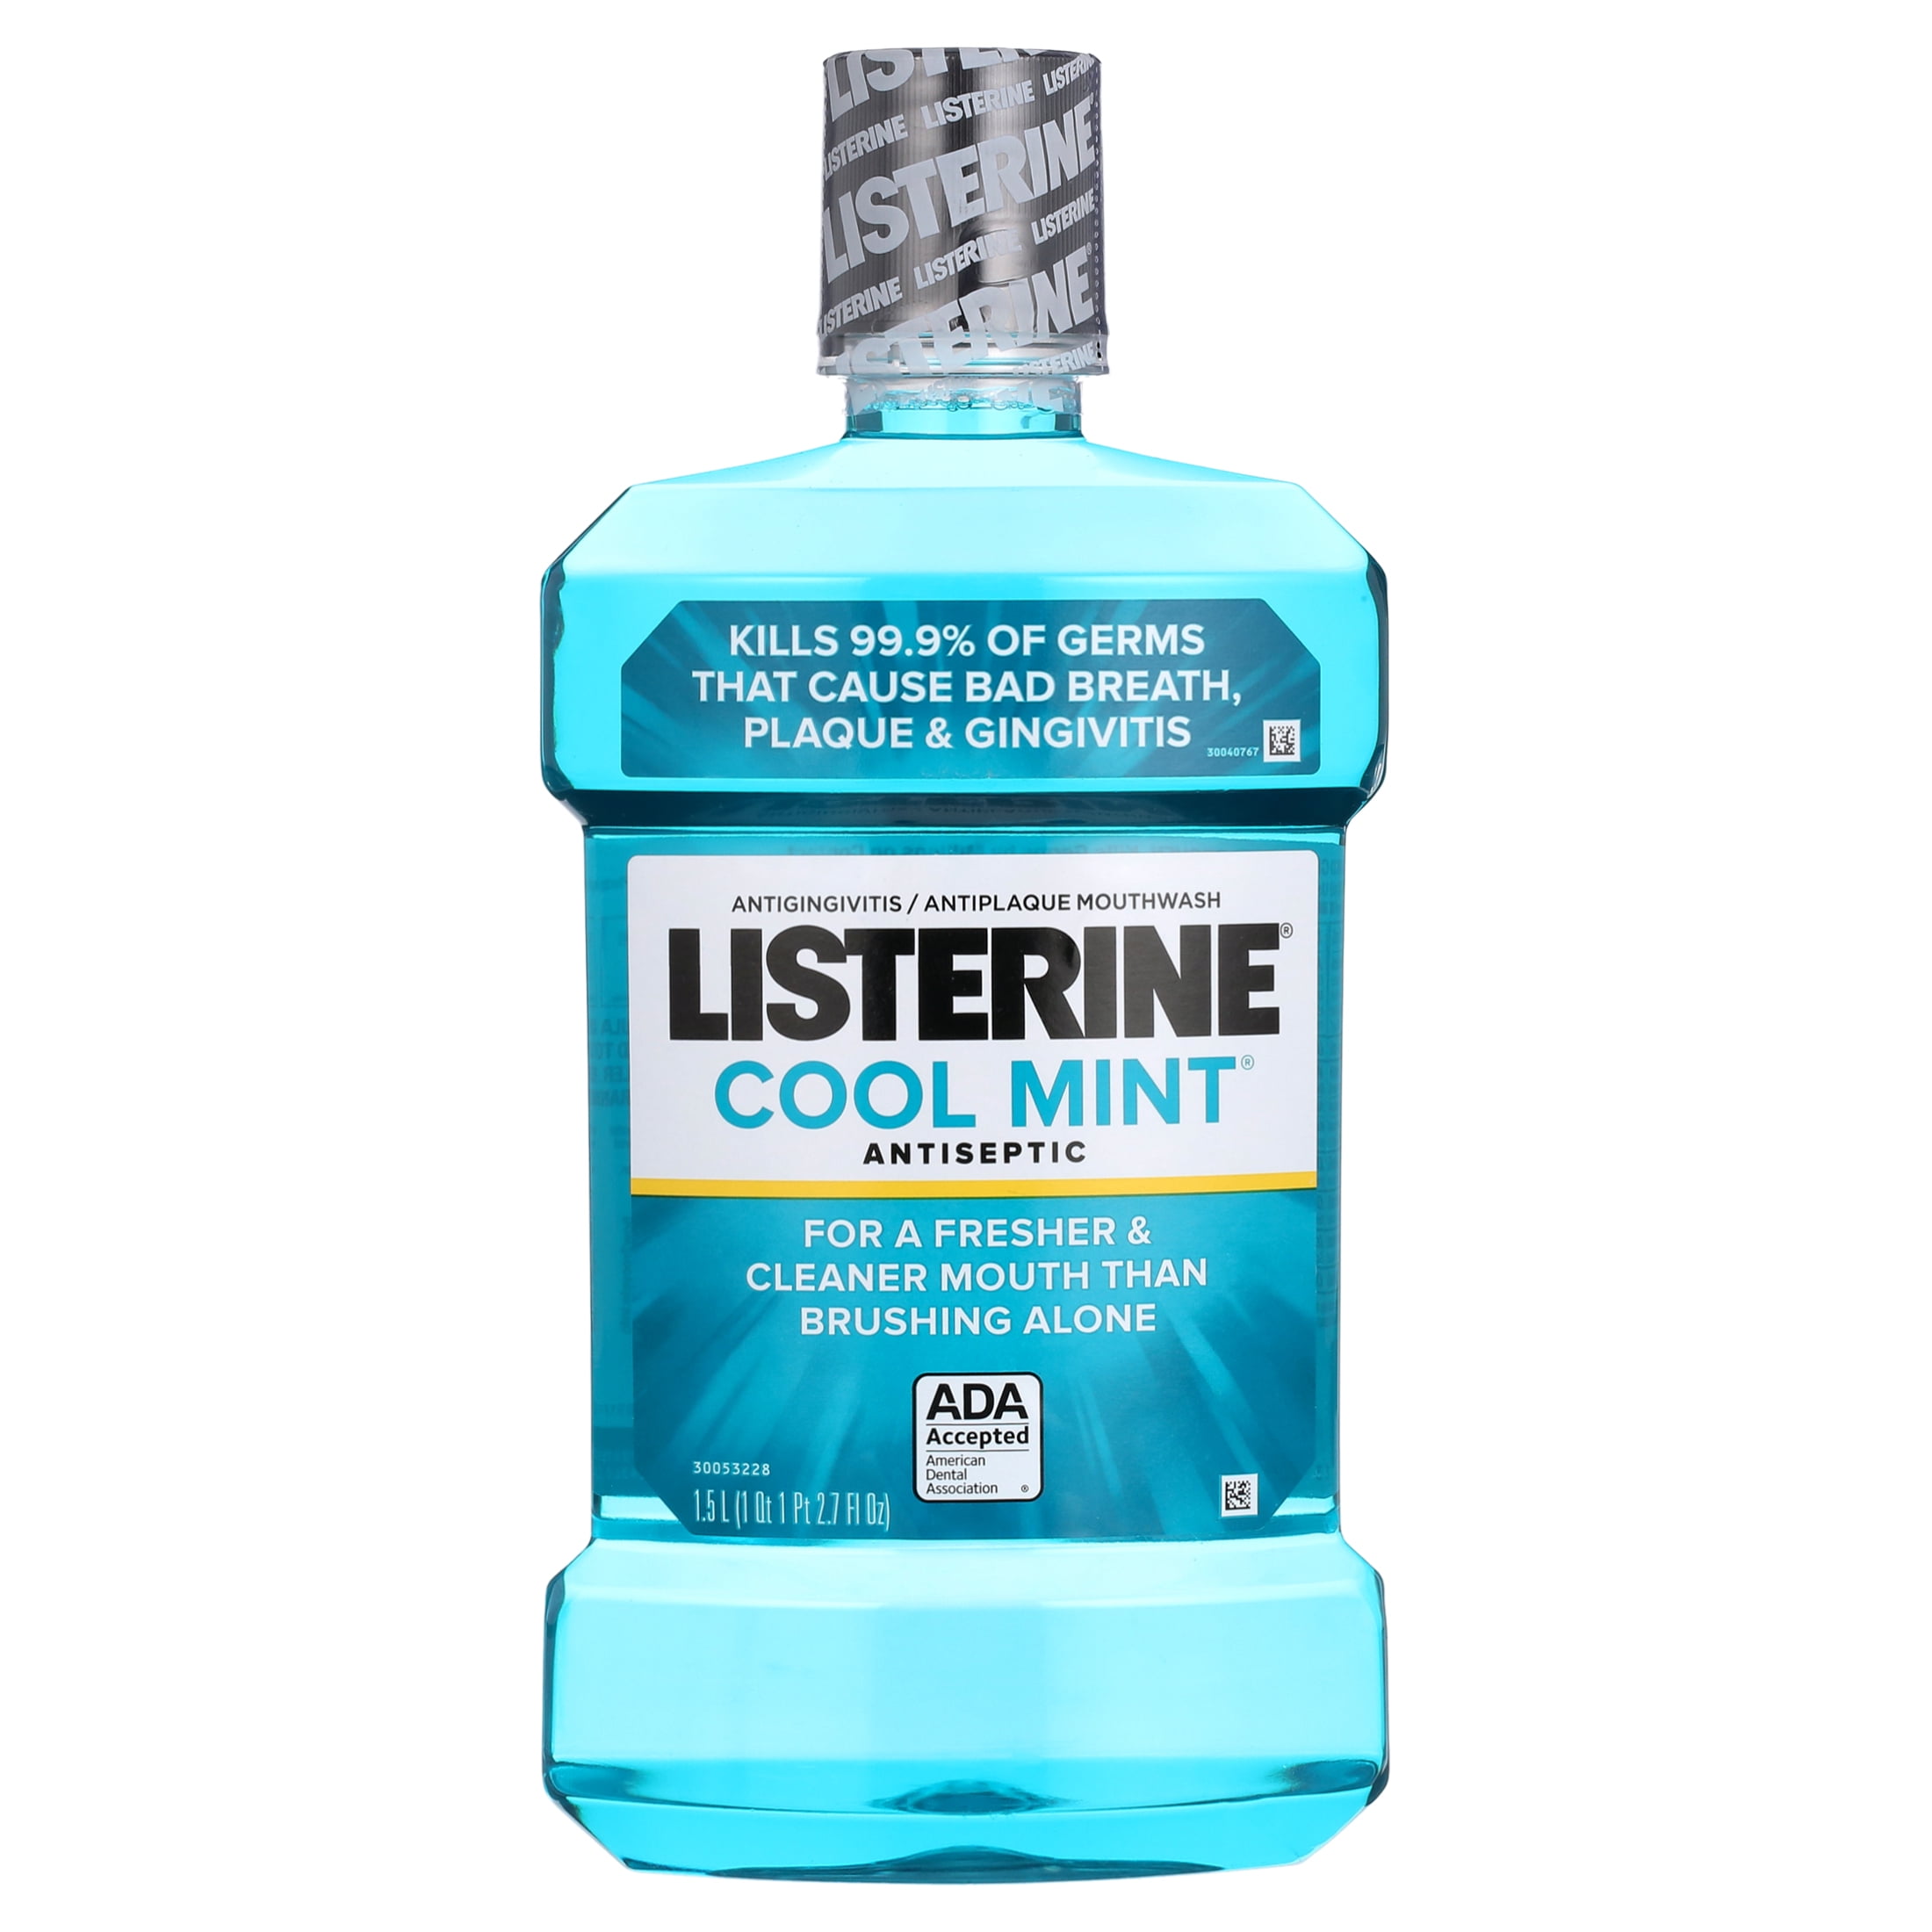 Listerine Cool Mint Antiseptic Mouthwash/Mouth Rinse for Bad Breath &  Plaque, 1.5 L 